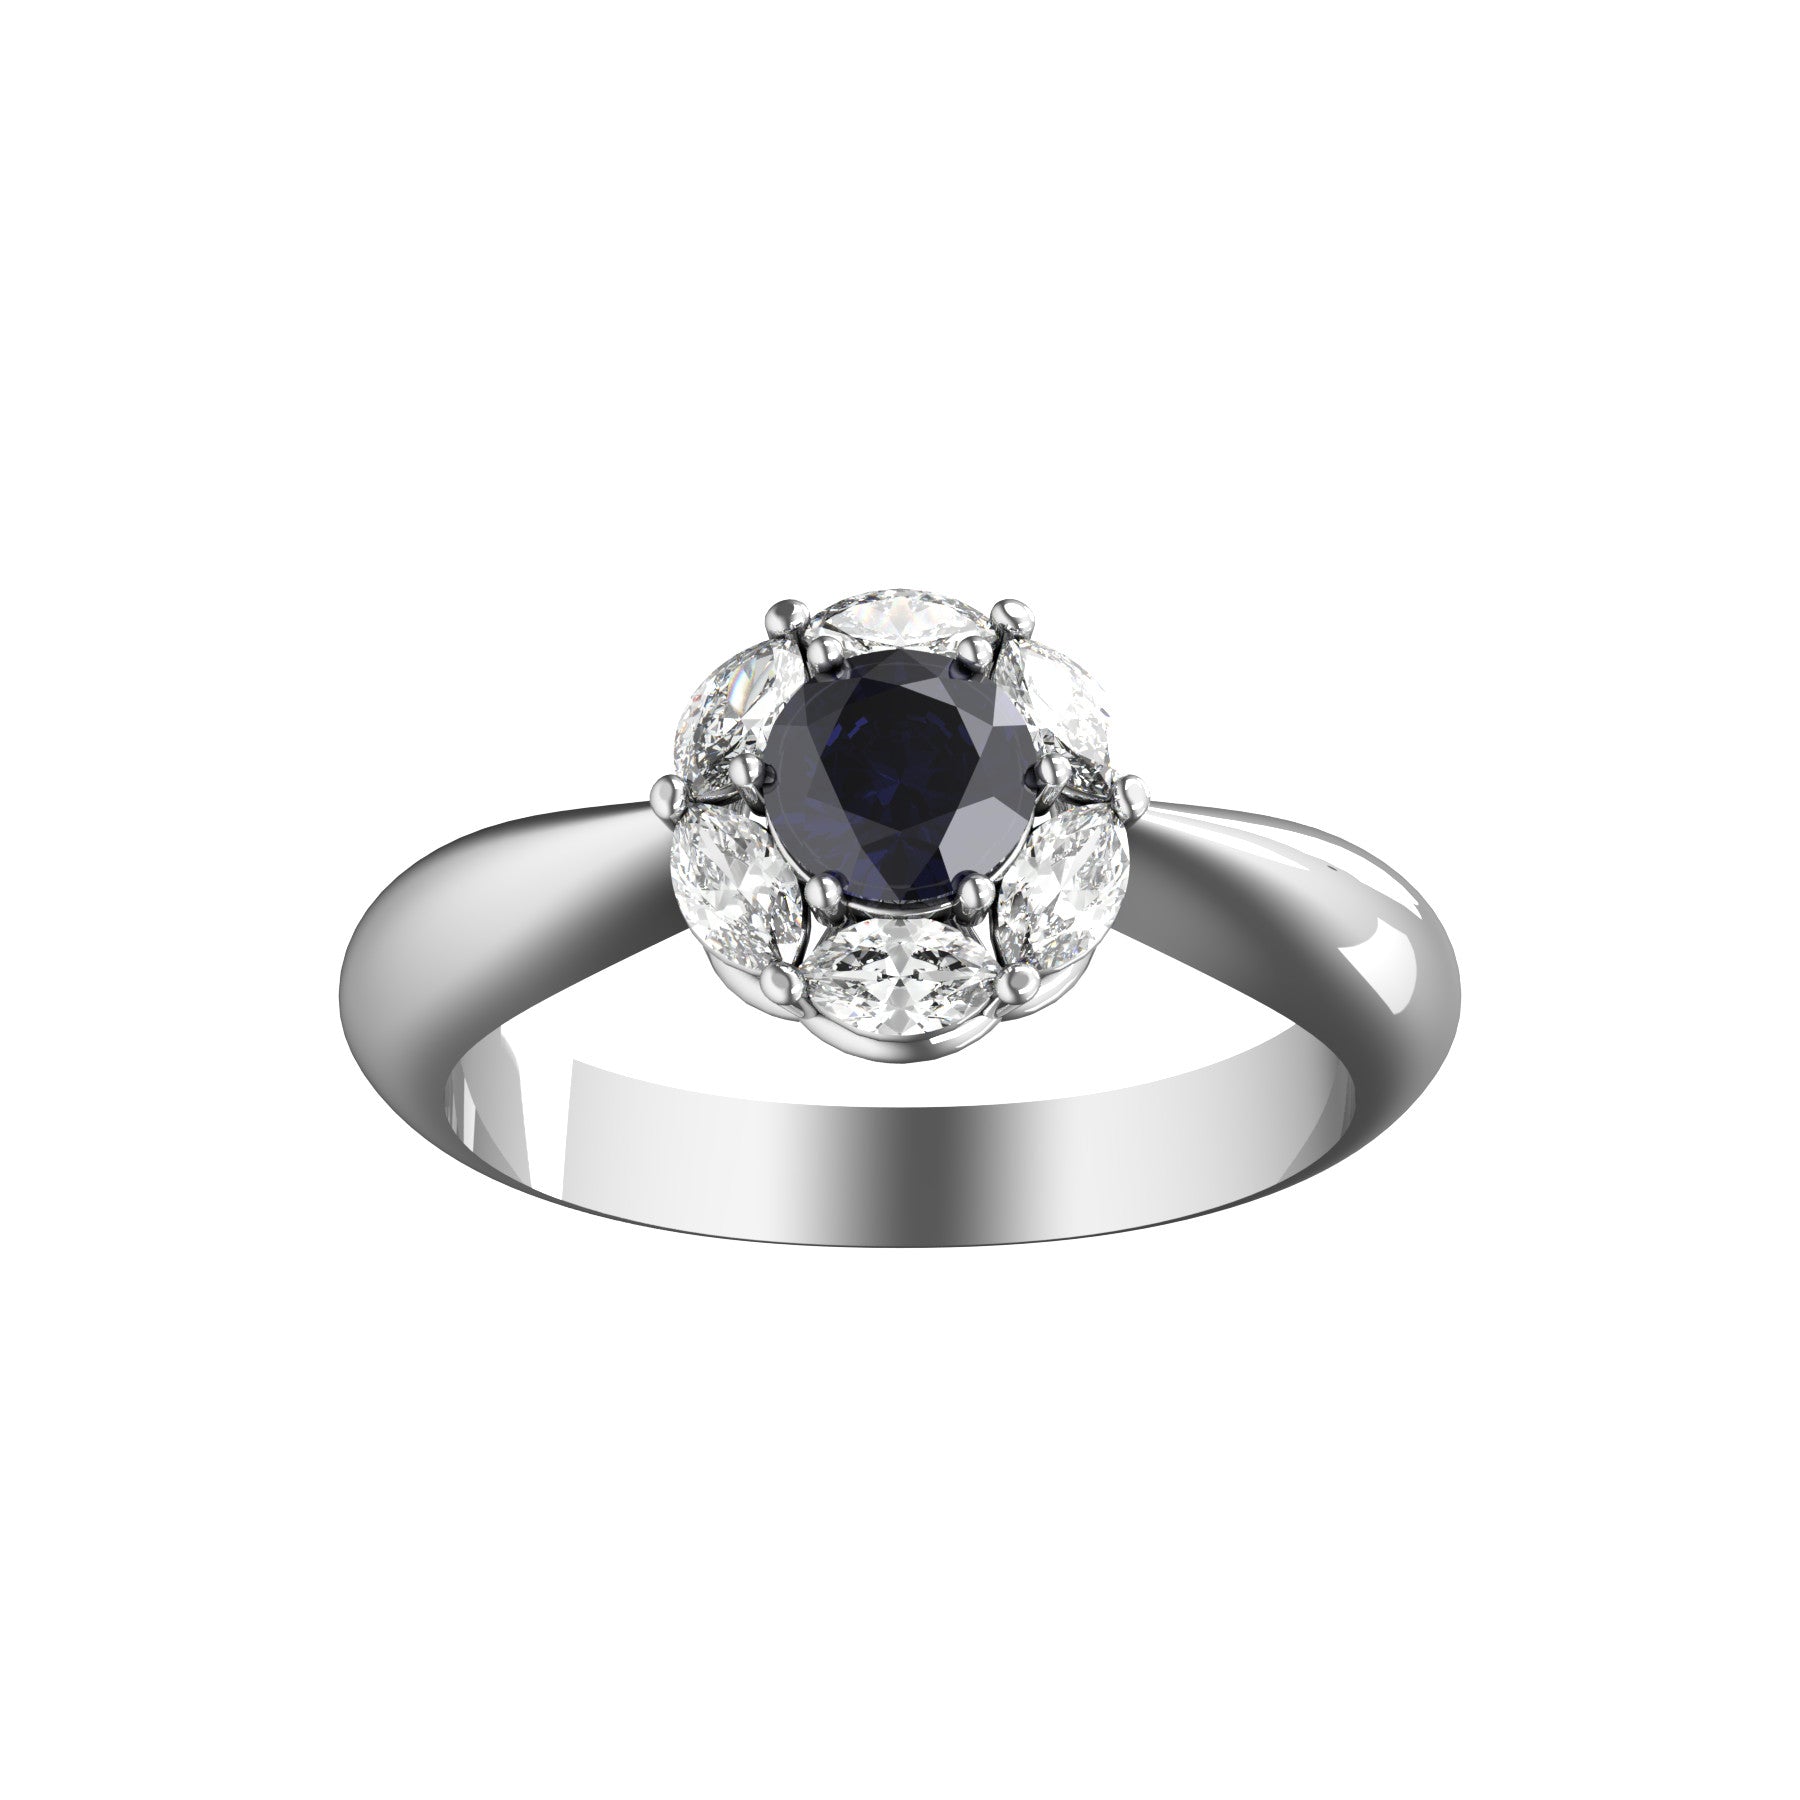 deep love ring, 18 K white gold, about 0,34 ct round natural sapphire, navette natural diamonds, weight about 3,5 g. (0.12 oz), width 7,8 mm max